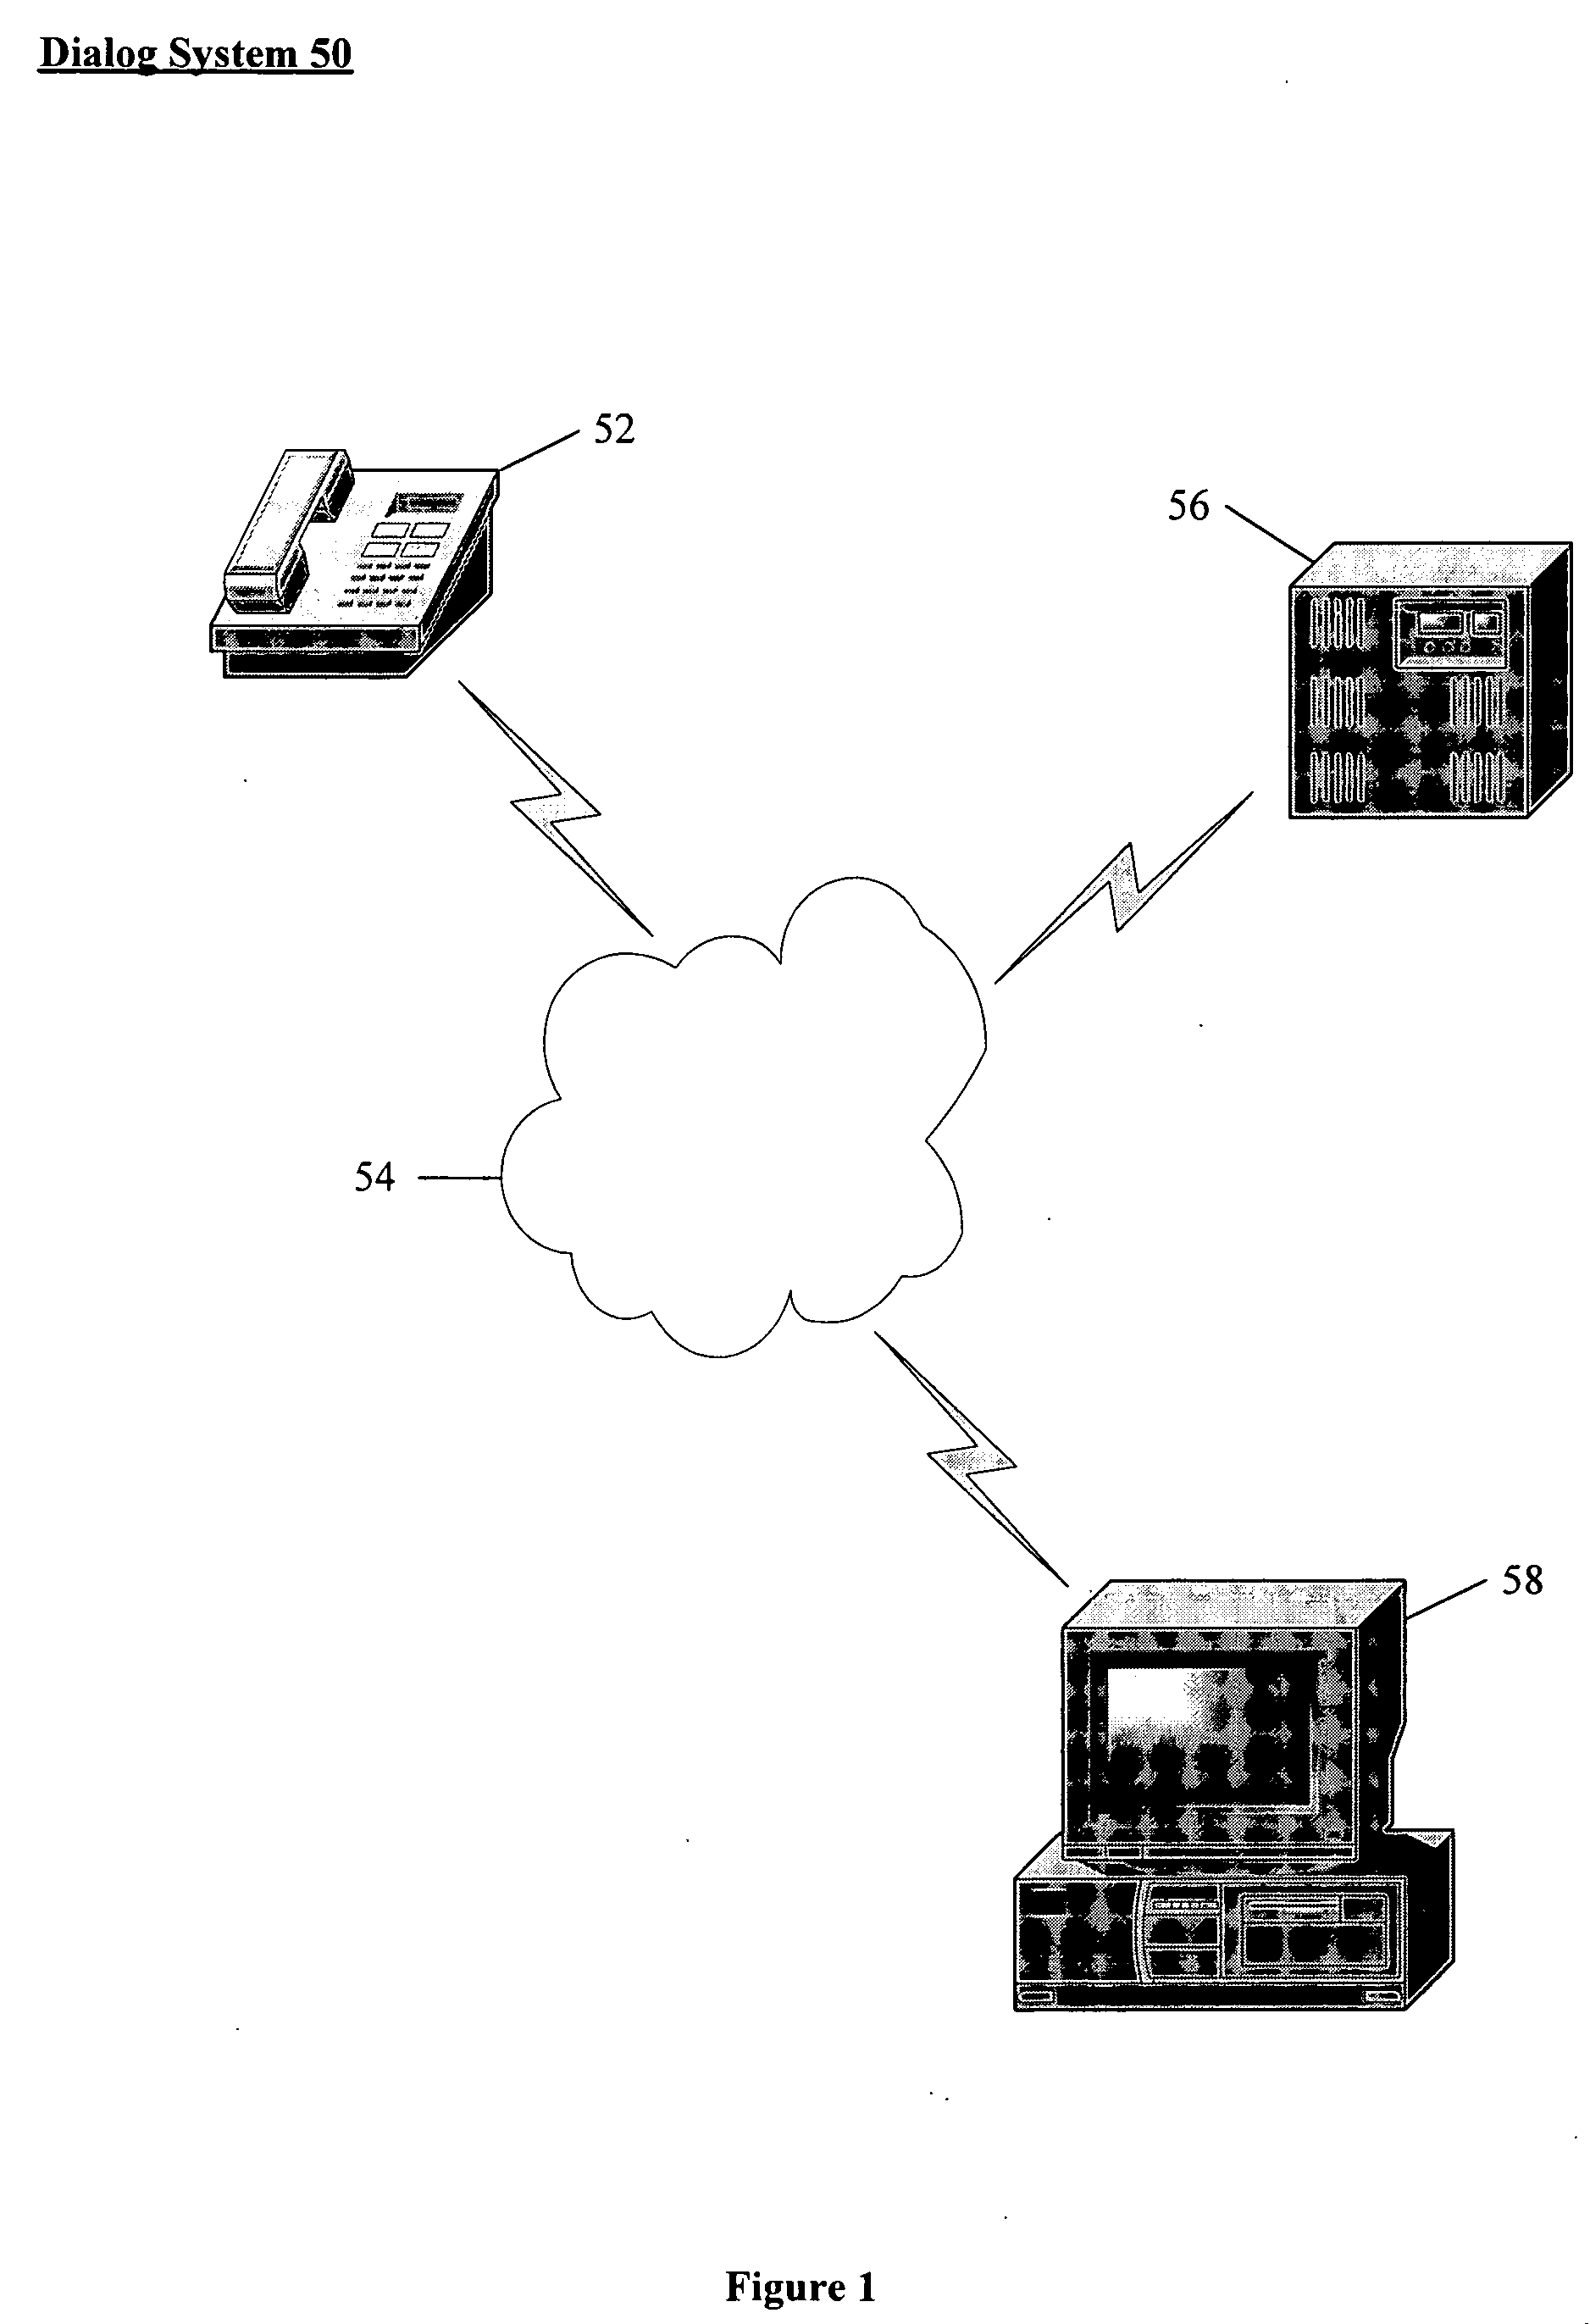 Method for automatic graphical profiling of a system